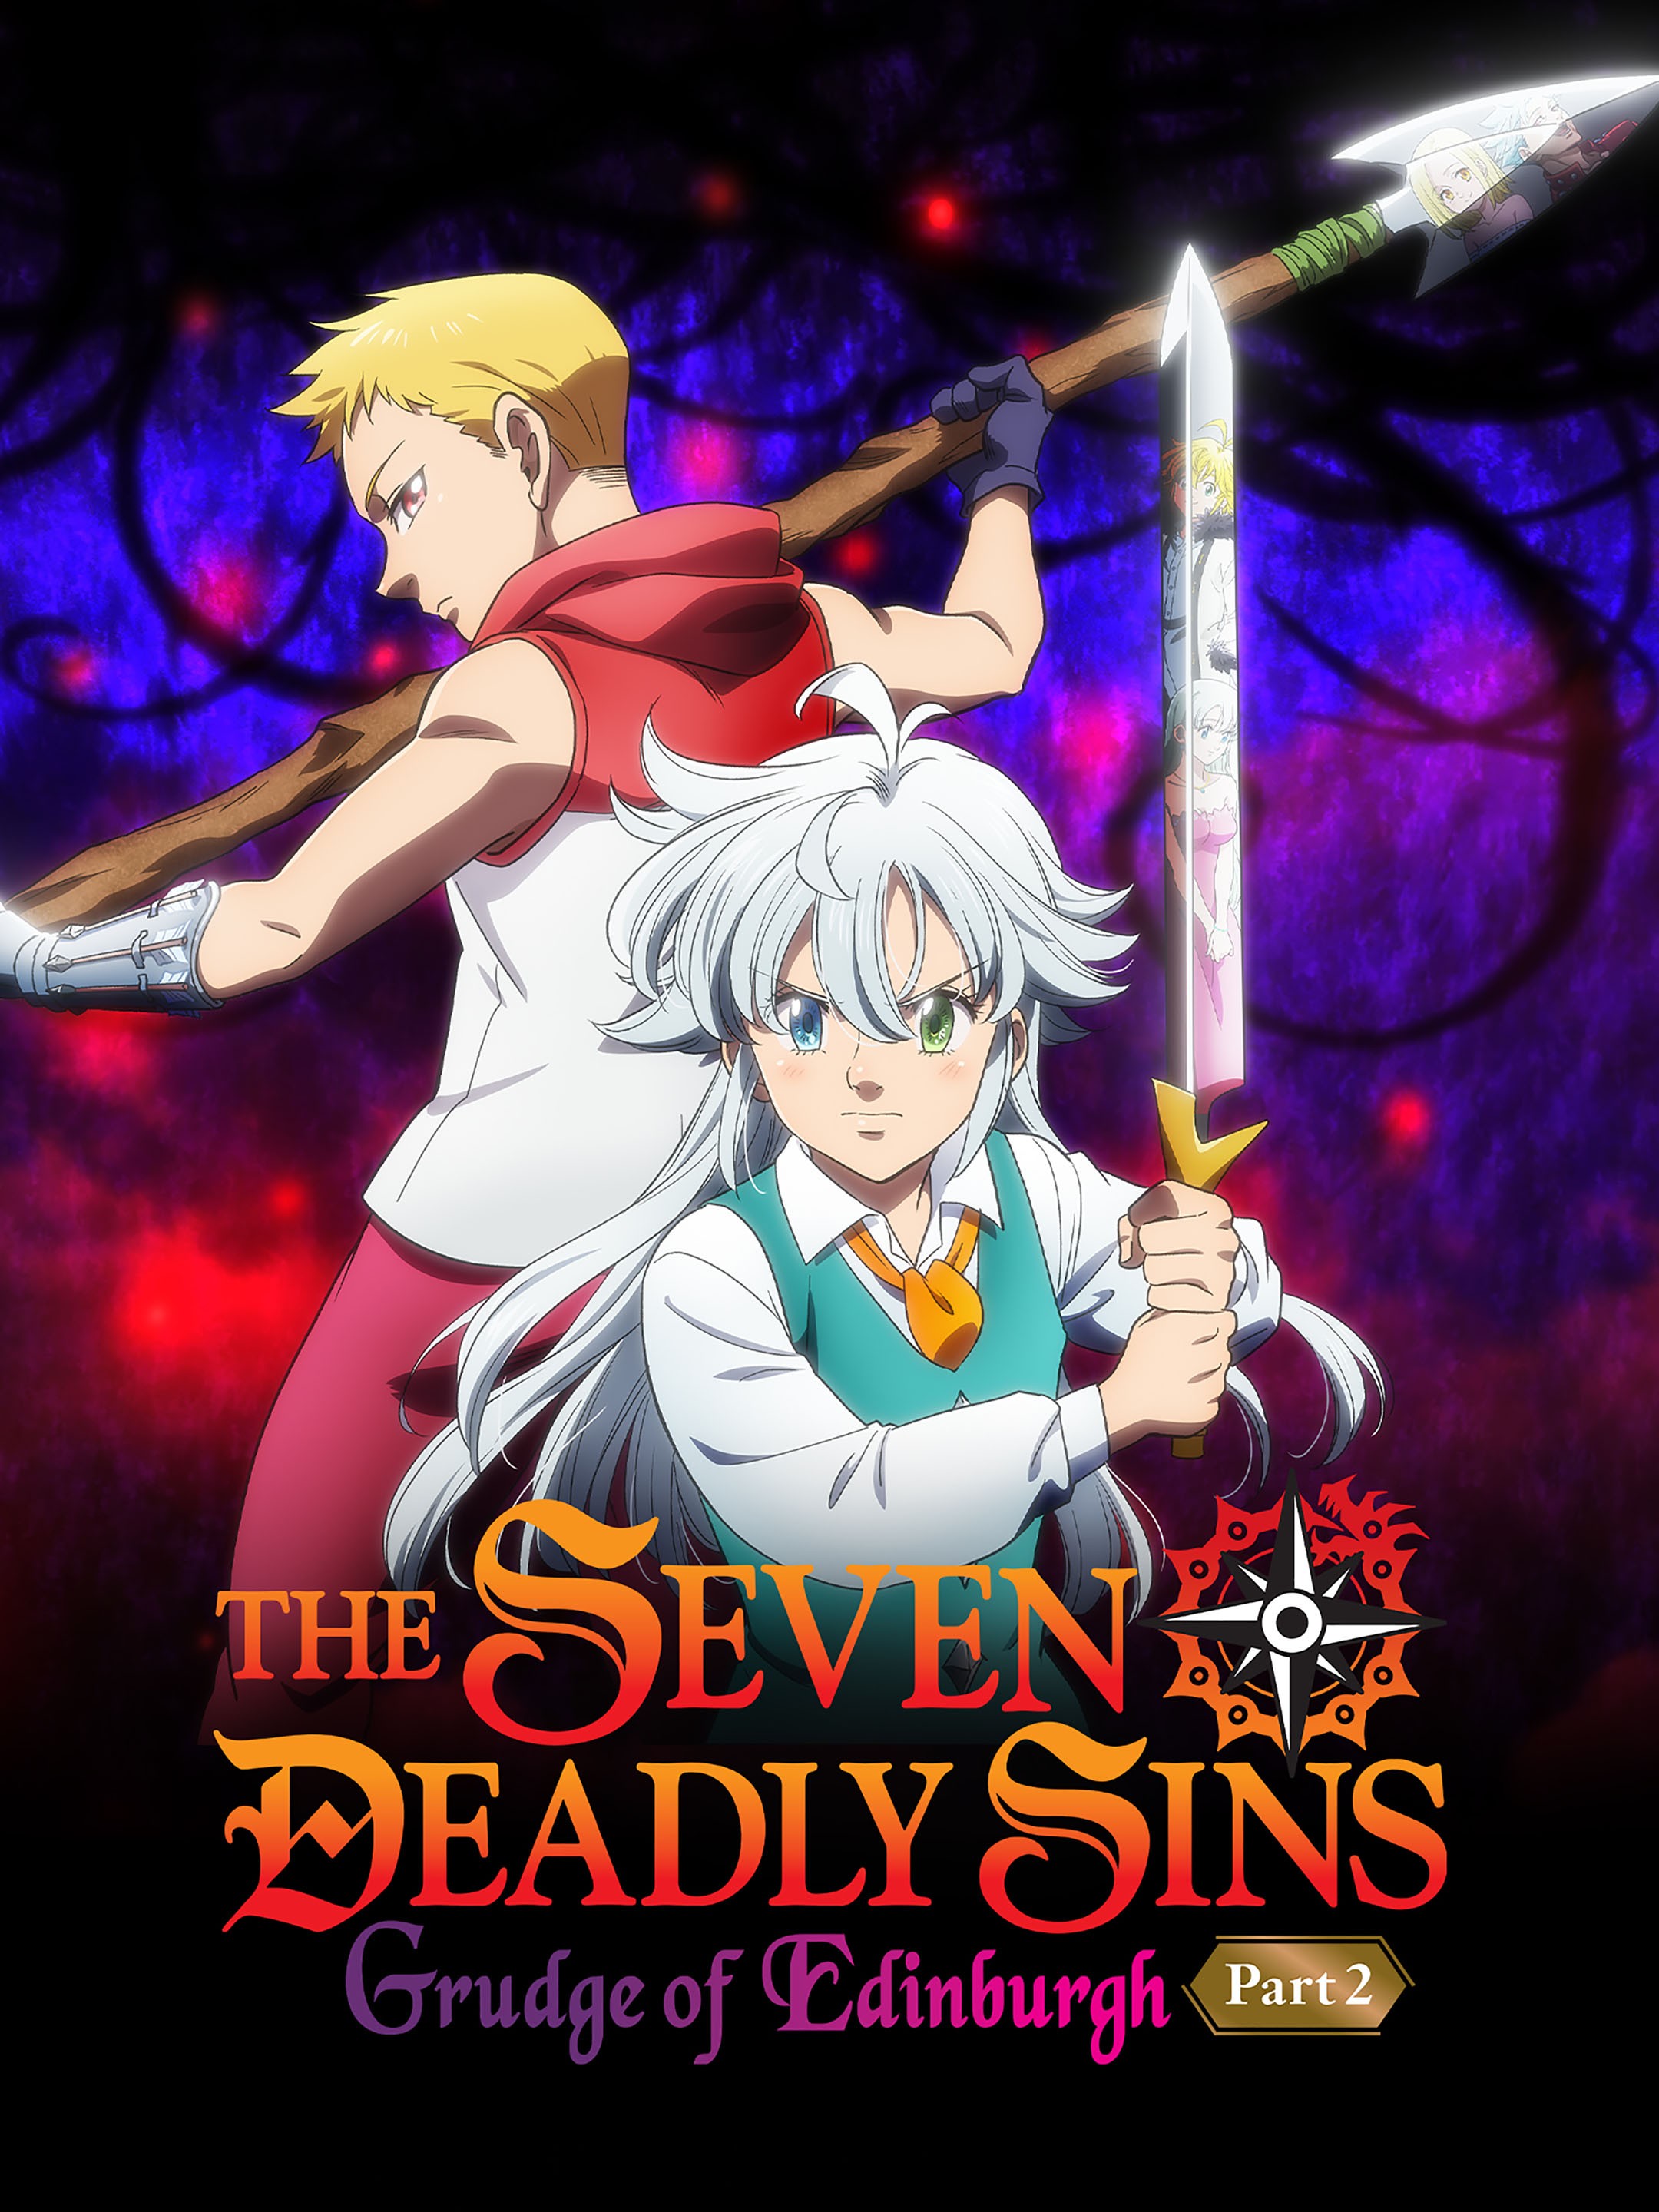 The Seven Deadly Sins: Grand Cross - We're pleased to announce the